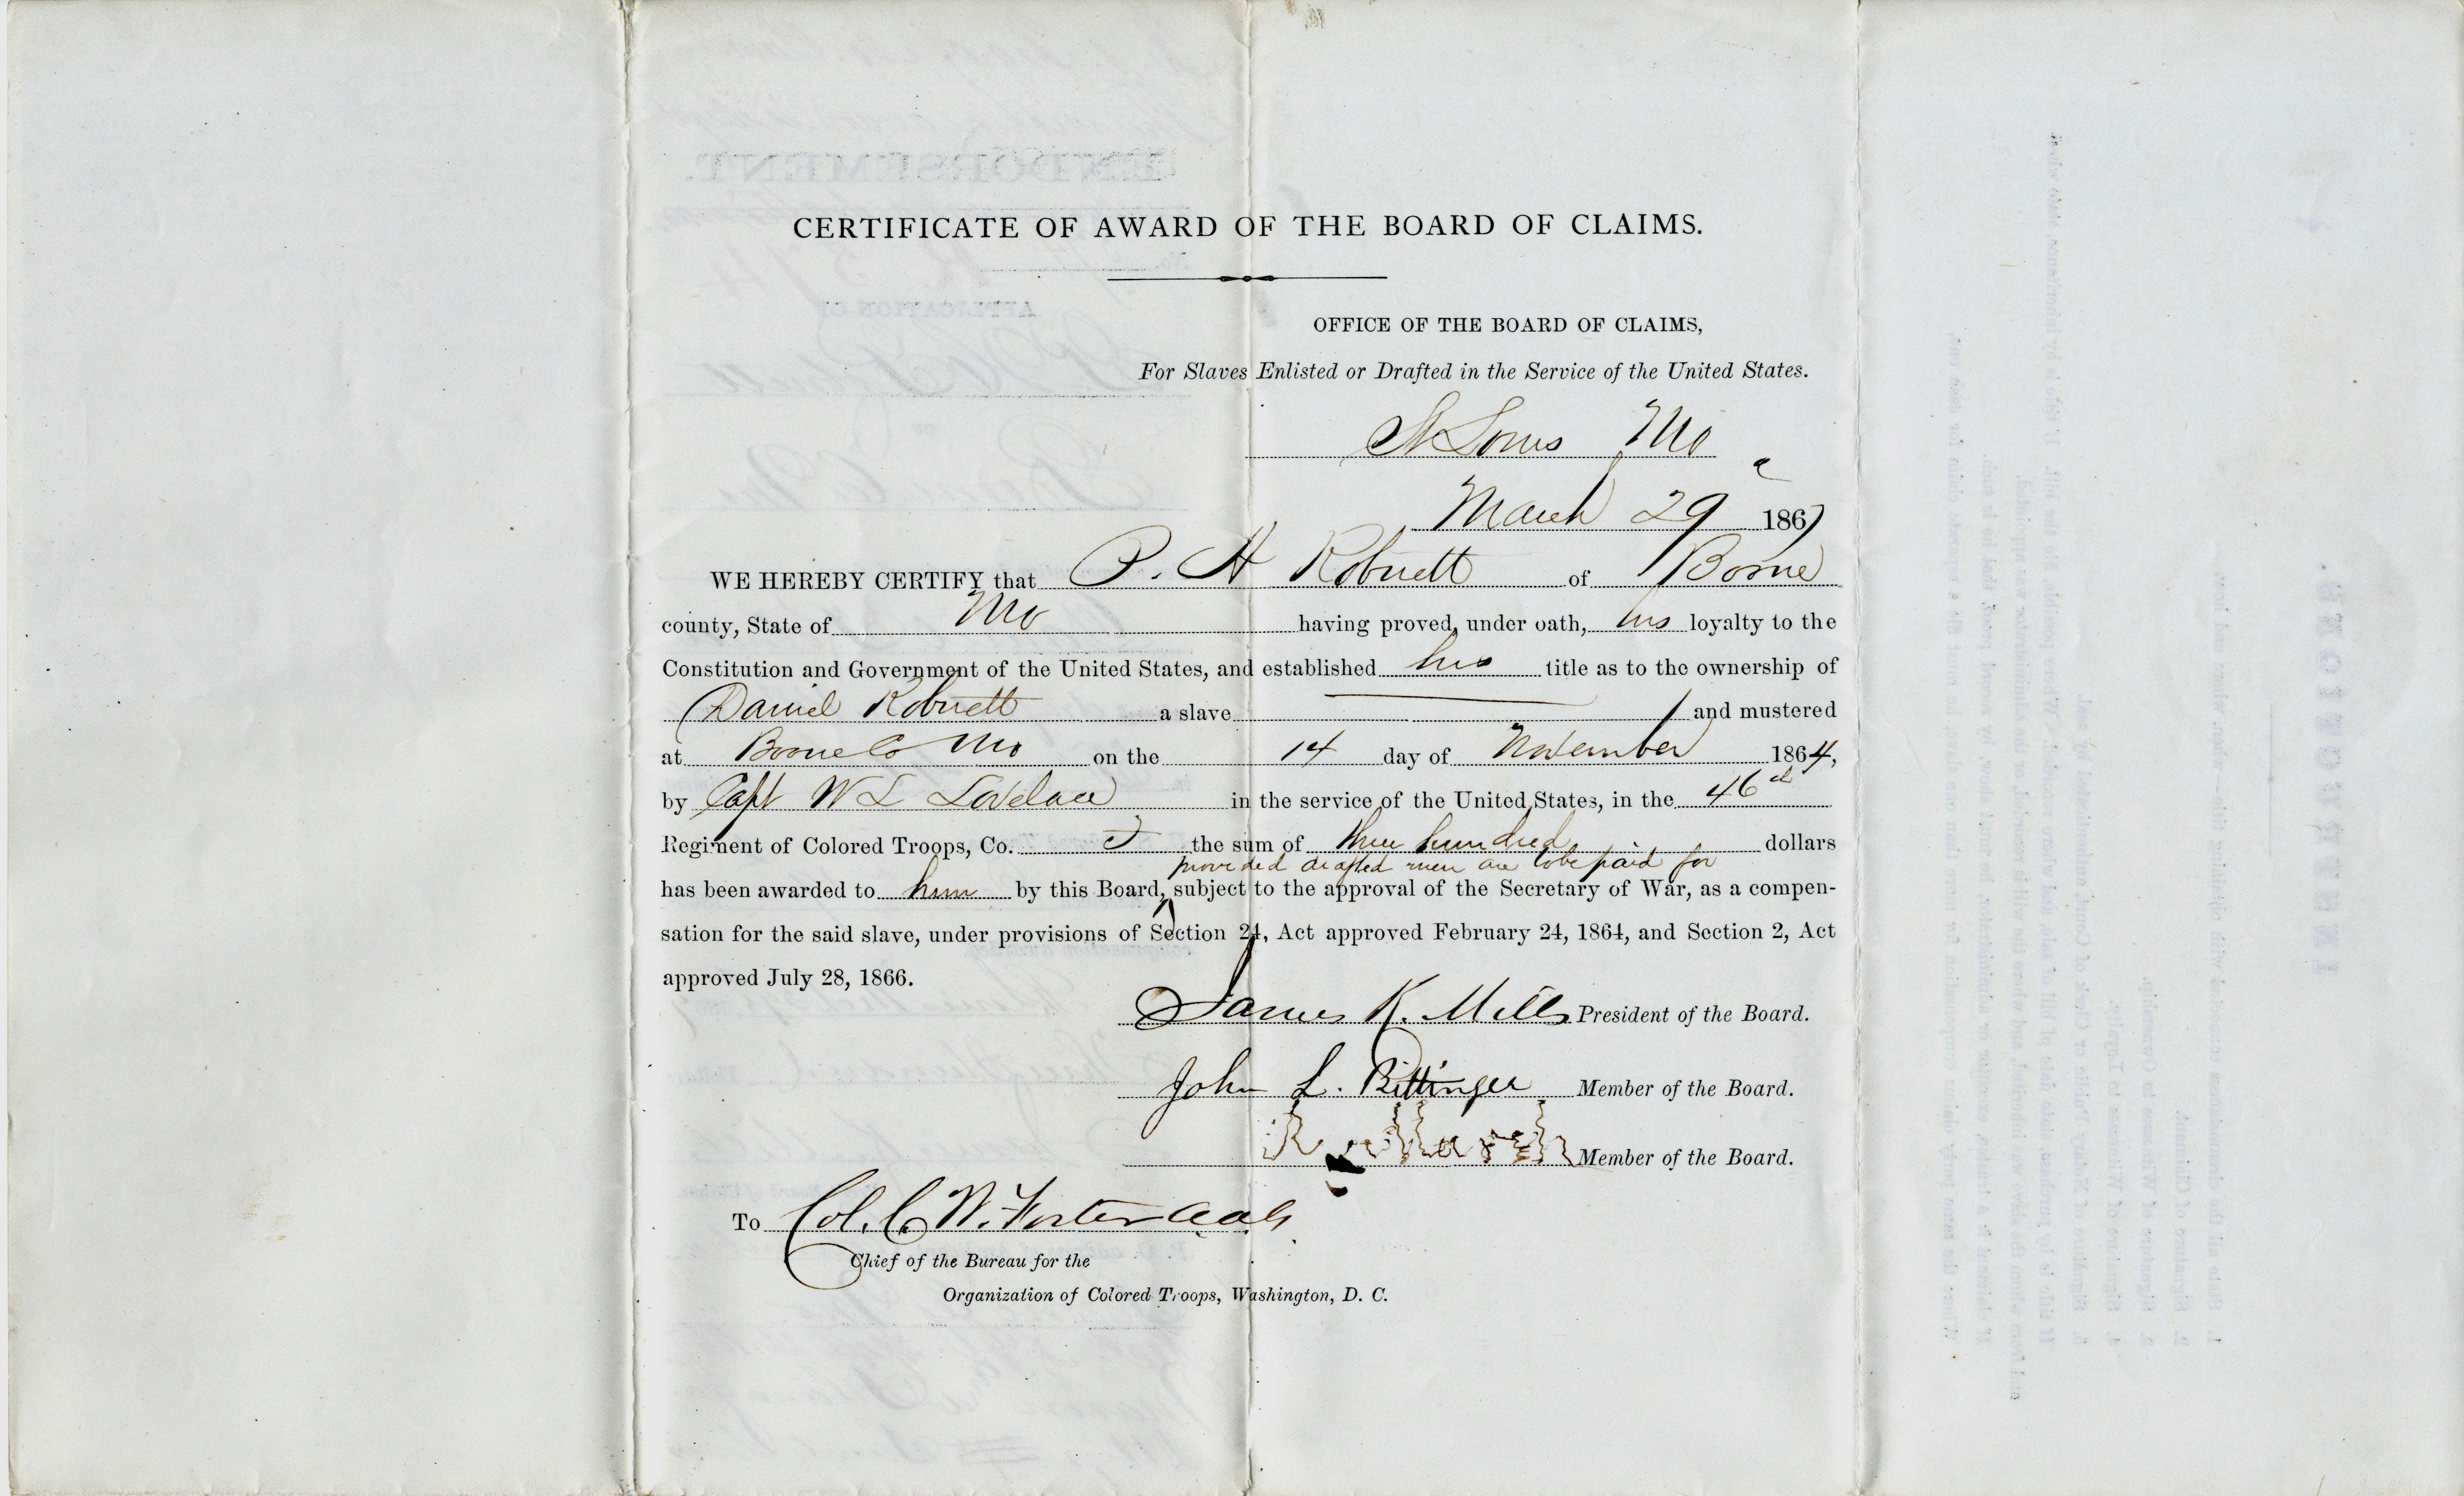 Image of a document certifying the claim for compensation of an enlisted slave